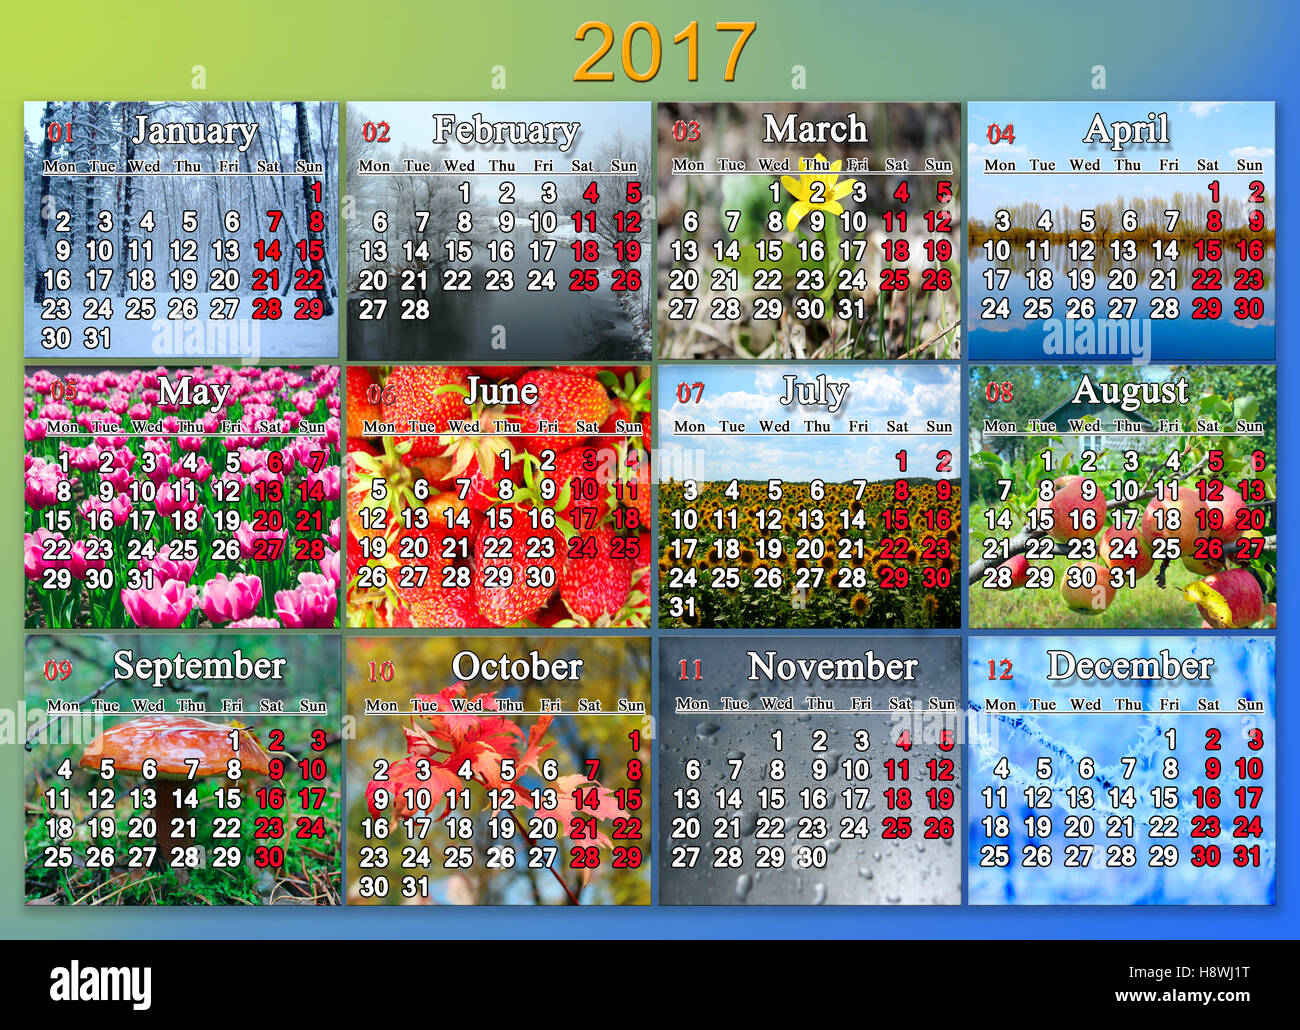 calendar for 2017 in English with photo of nature for every month Stock Photo